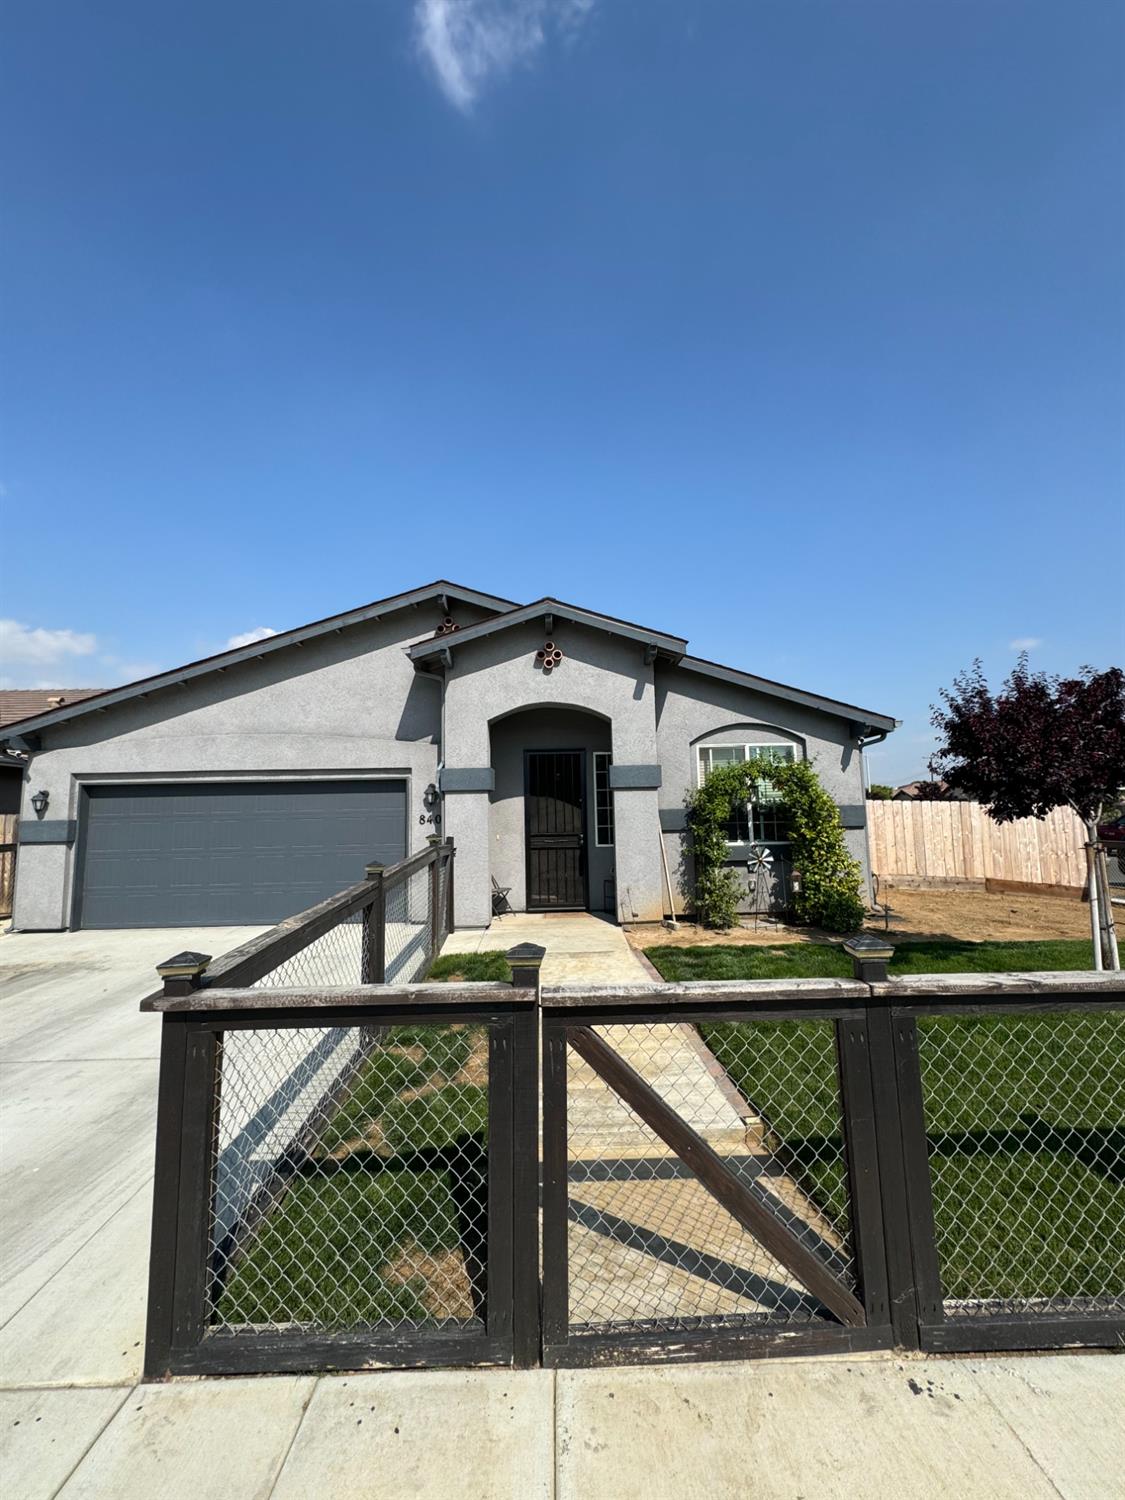 Photo of 840 Maple Ave in Lindsay, CA